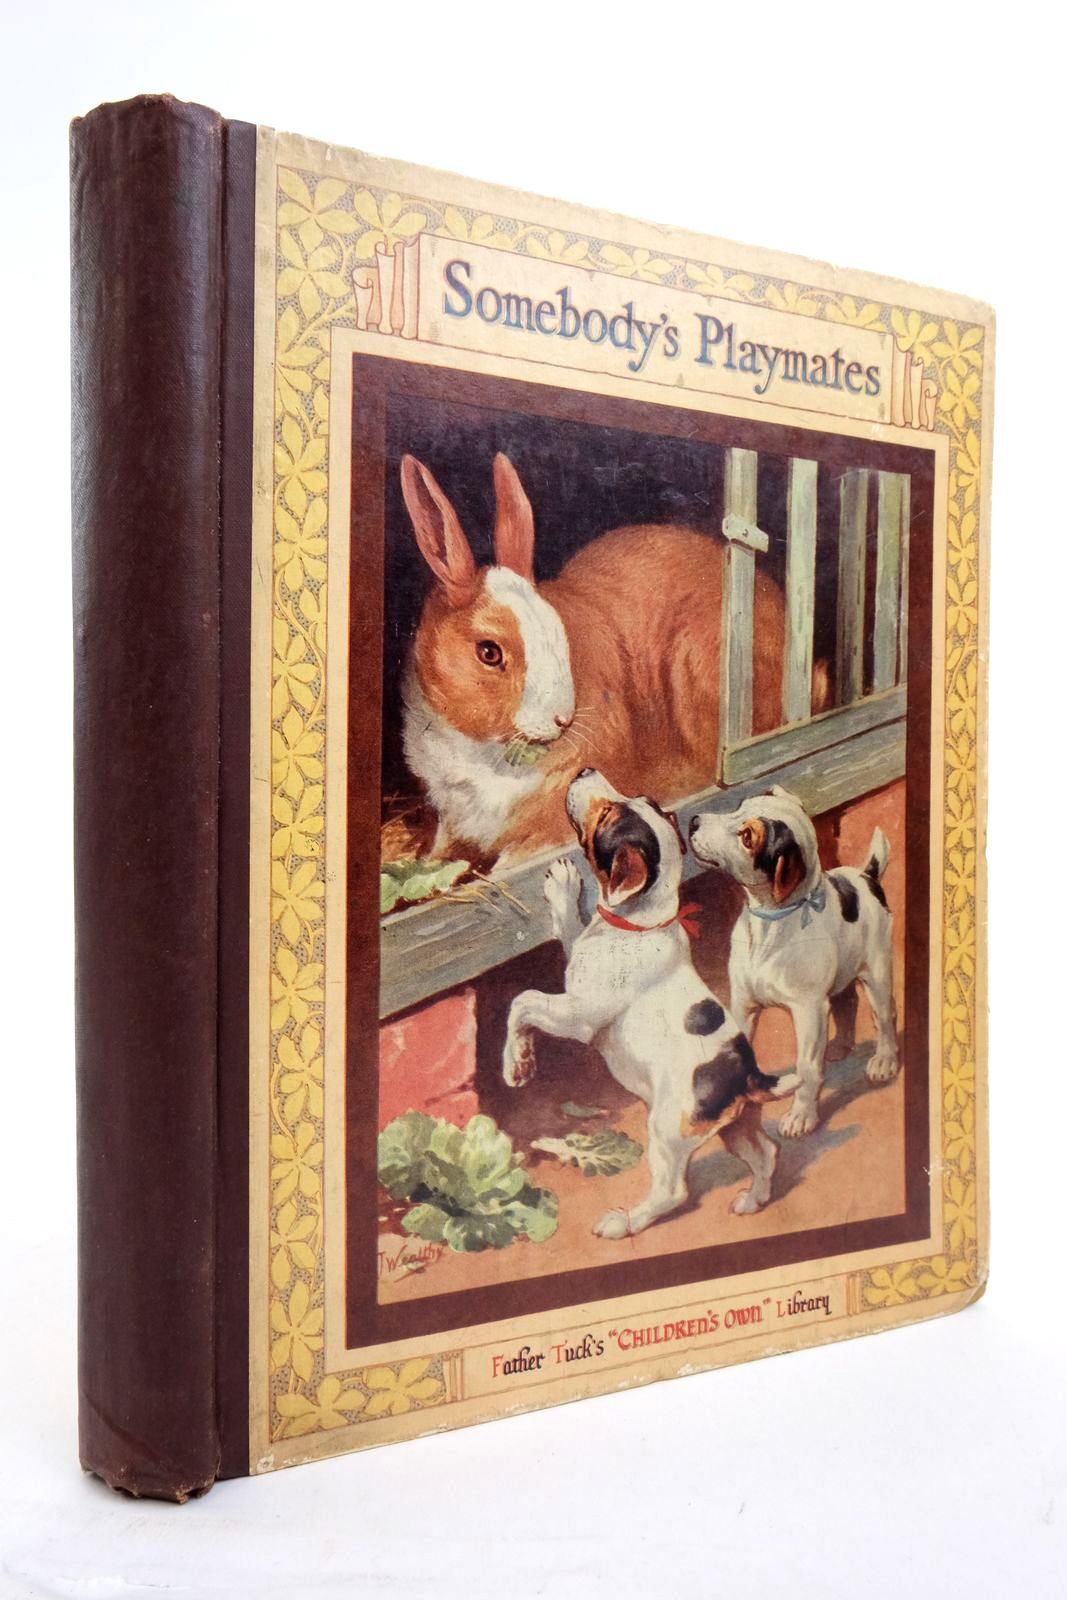 Photo of SOMEBODY'S PLAYMATES written by Fenn, George Manville
Bingham, Clifton
Vredenburg, Edric illustrated by Cowham, Hilda
Wealthy, R.J. published by Raphael Tuck & Sons Ltd. (STOCK CODE: 2137694)  for sale by Stella & Rose's Books